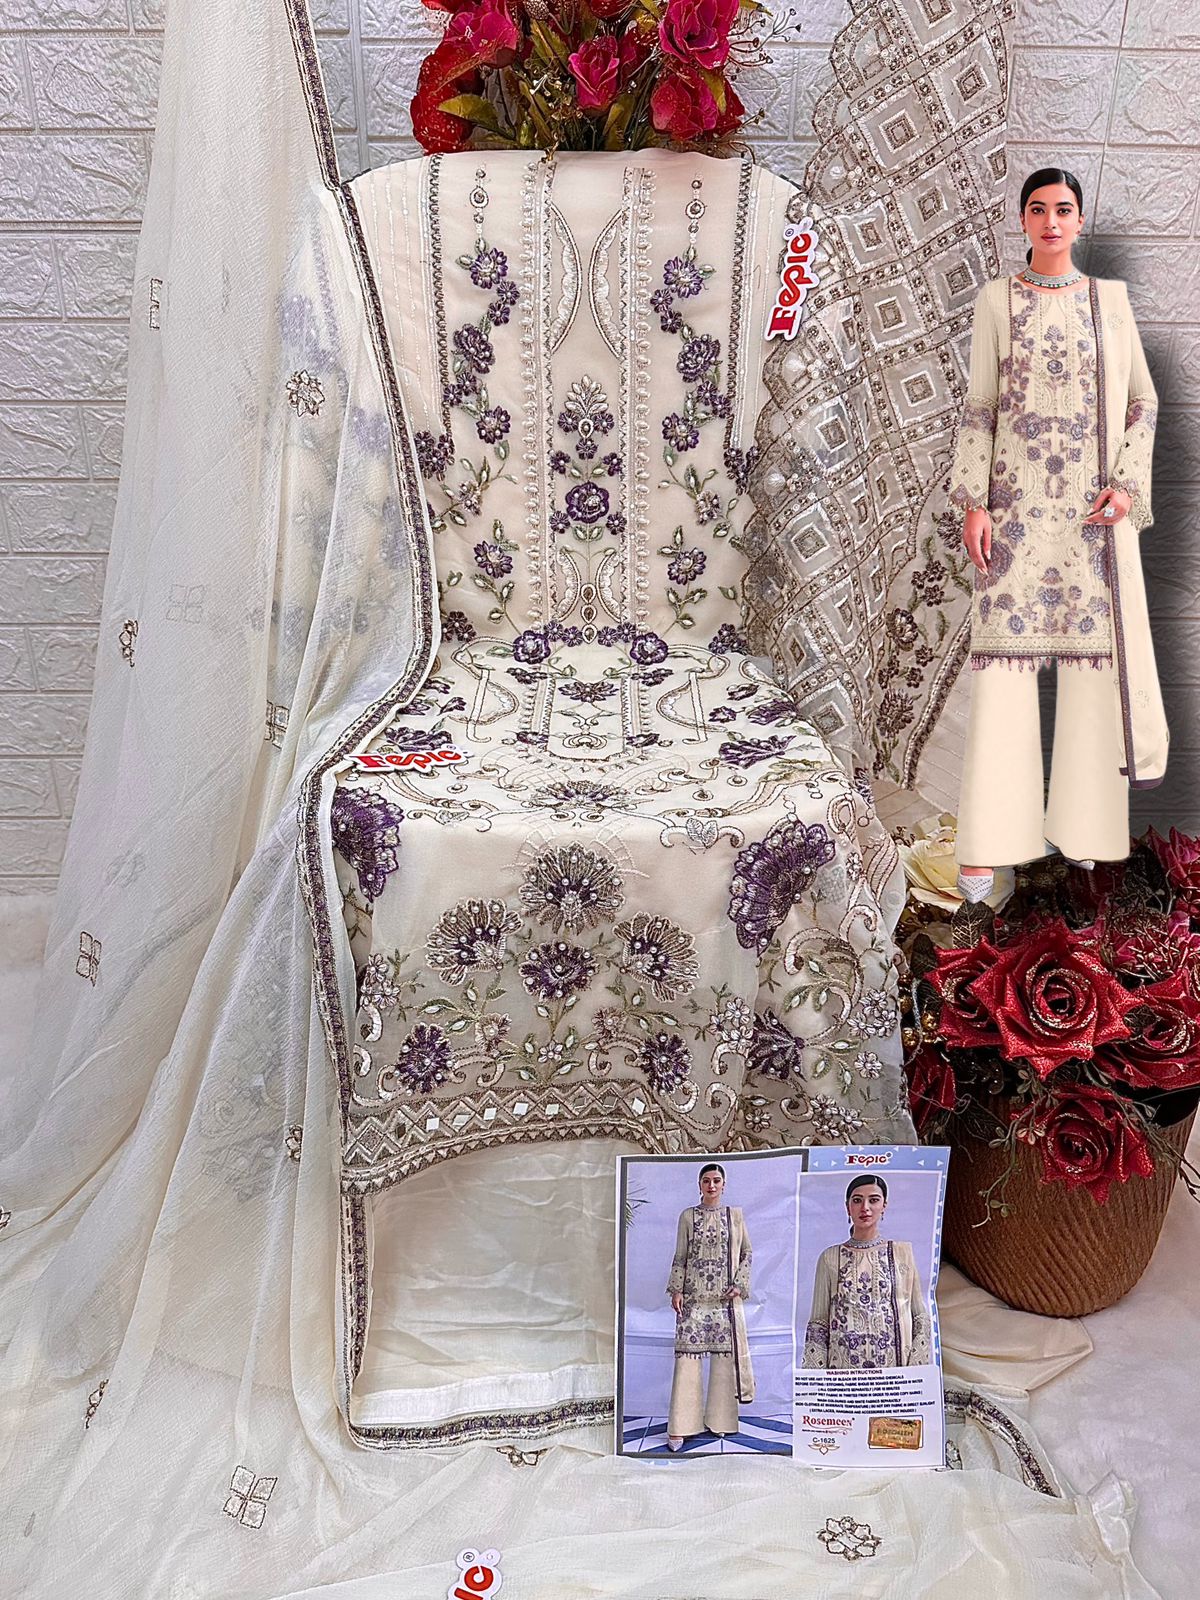 Embrace Tradition with Premium Salwar Kameez in Style